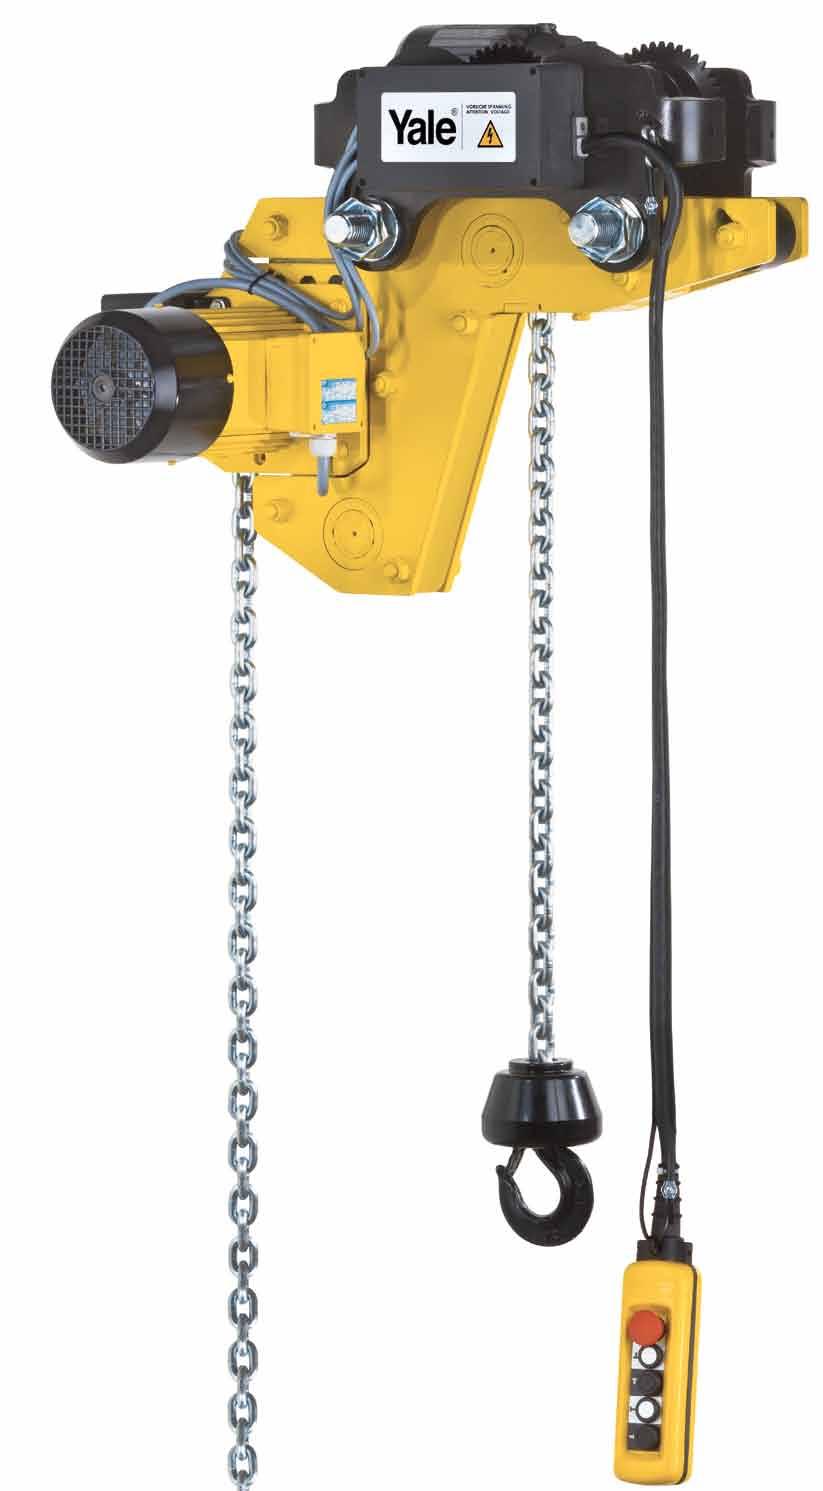 Hoisting Equipment Electric chain hoists Compact planetary gearbox Electric chain hoist with low headroom integrated trolley Zinc-plated Yale load chain All capacities and speeds of the standard